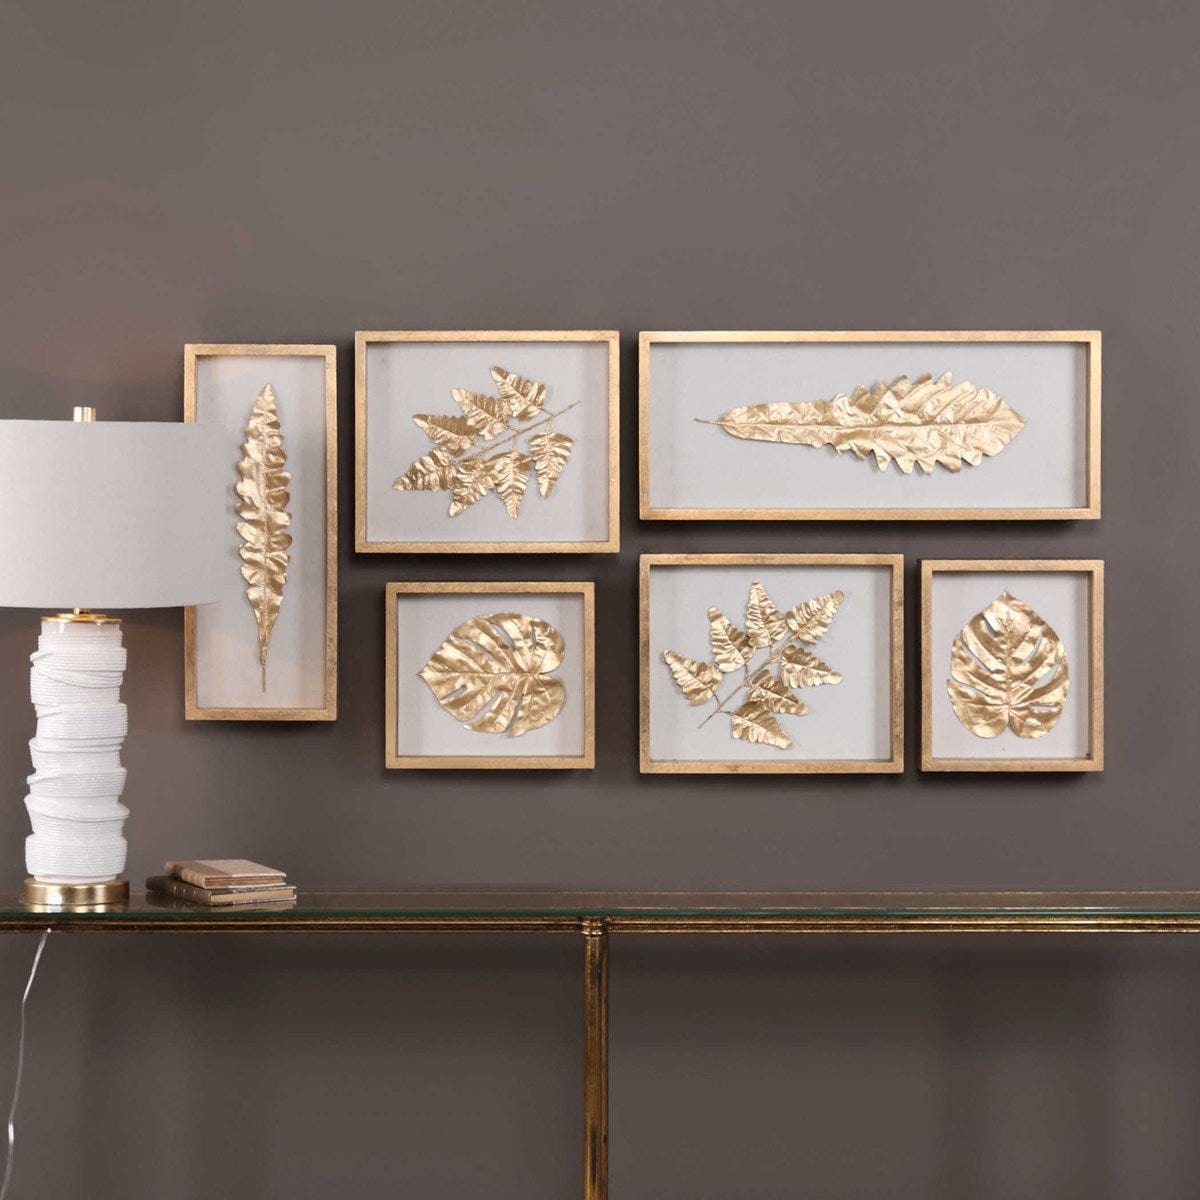 Golden Leaves Shadow Boxes, S/6 Uttermost